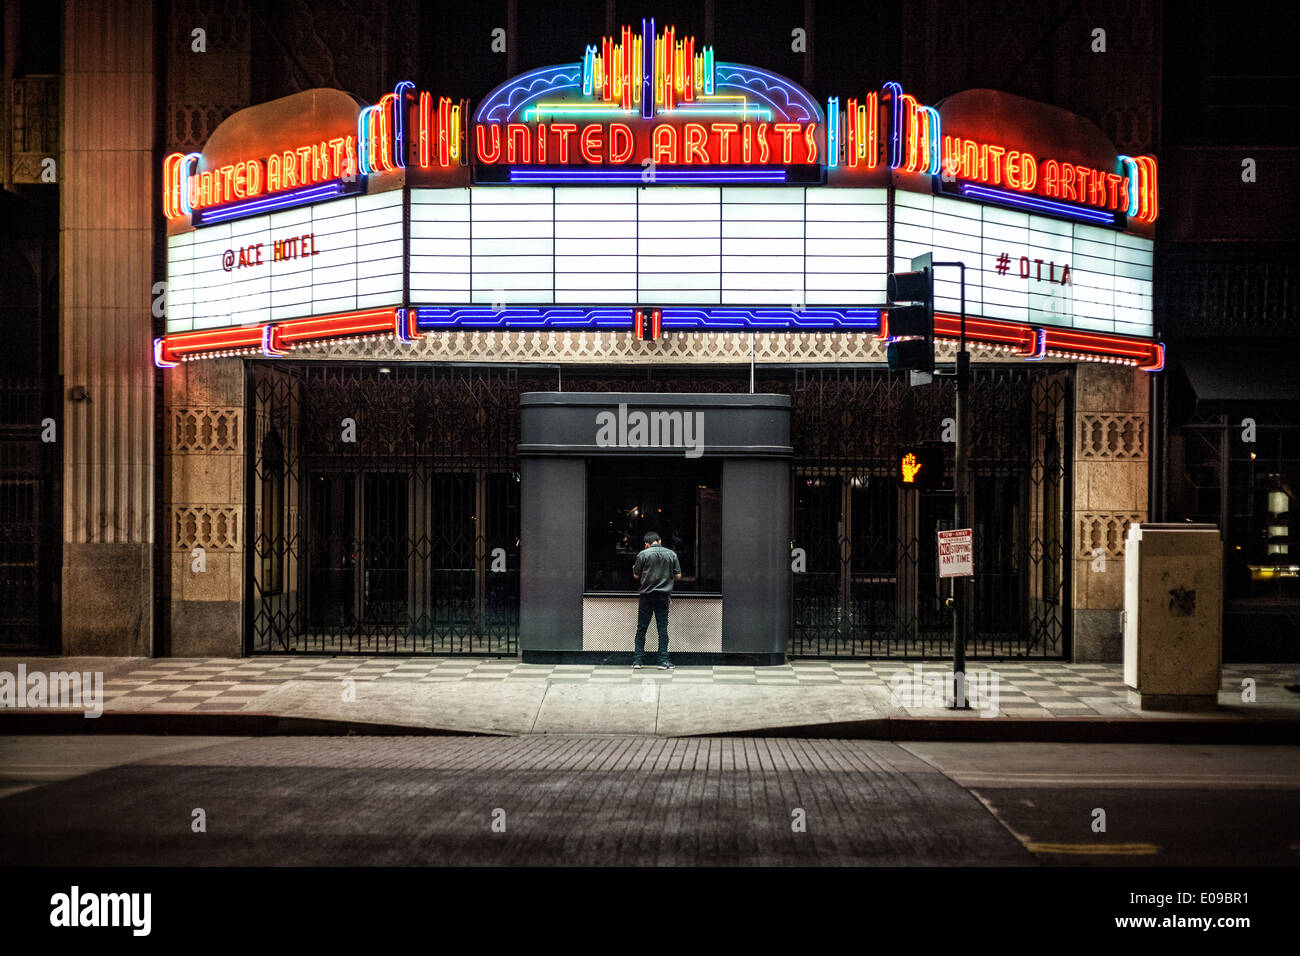 A nighttime exposure in front of an illuminated movie theater marquee Stock Photo